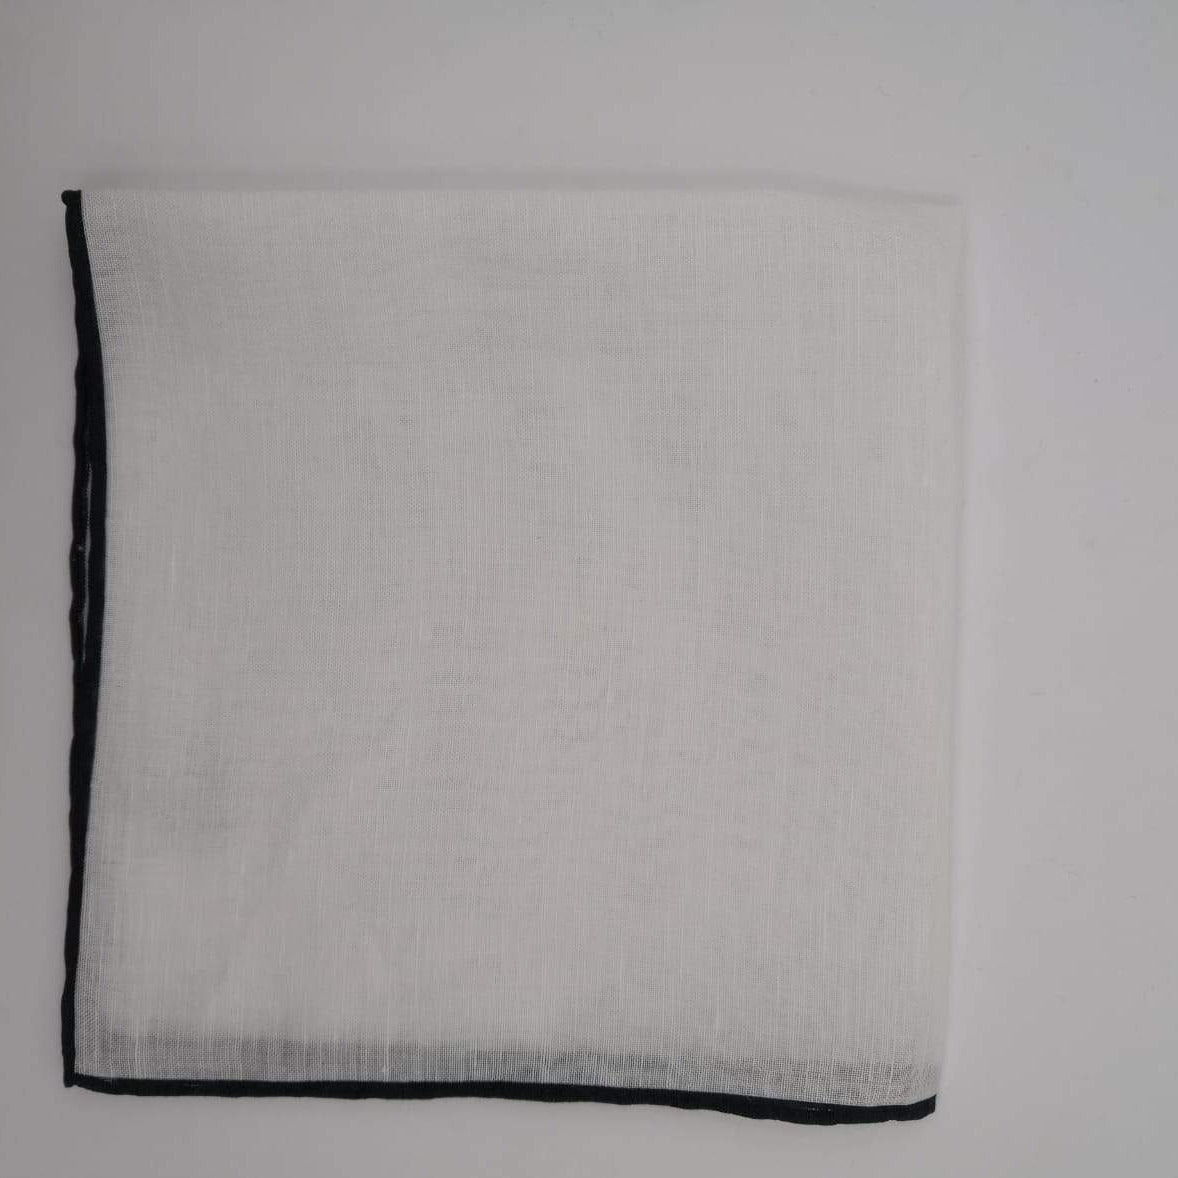 Cruciani & Bella 100% Hand-rolled  -  Pocket Square White and Dark Blue Handmade in Italy 31 cm X 31 cm #6736